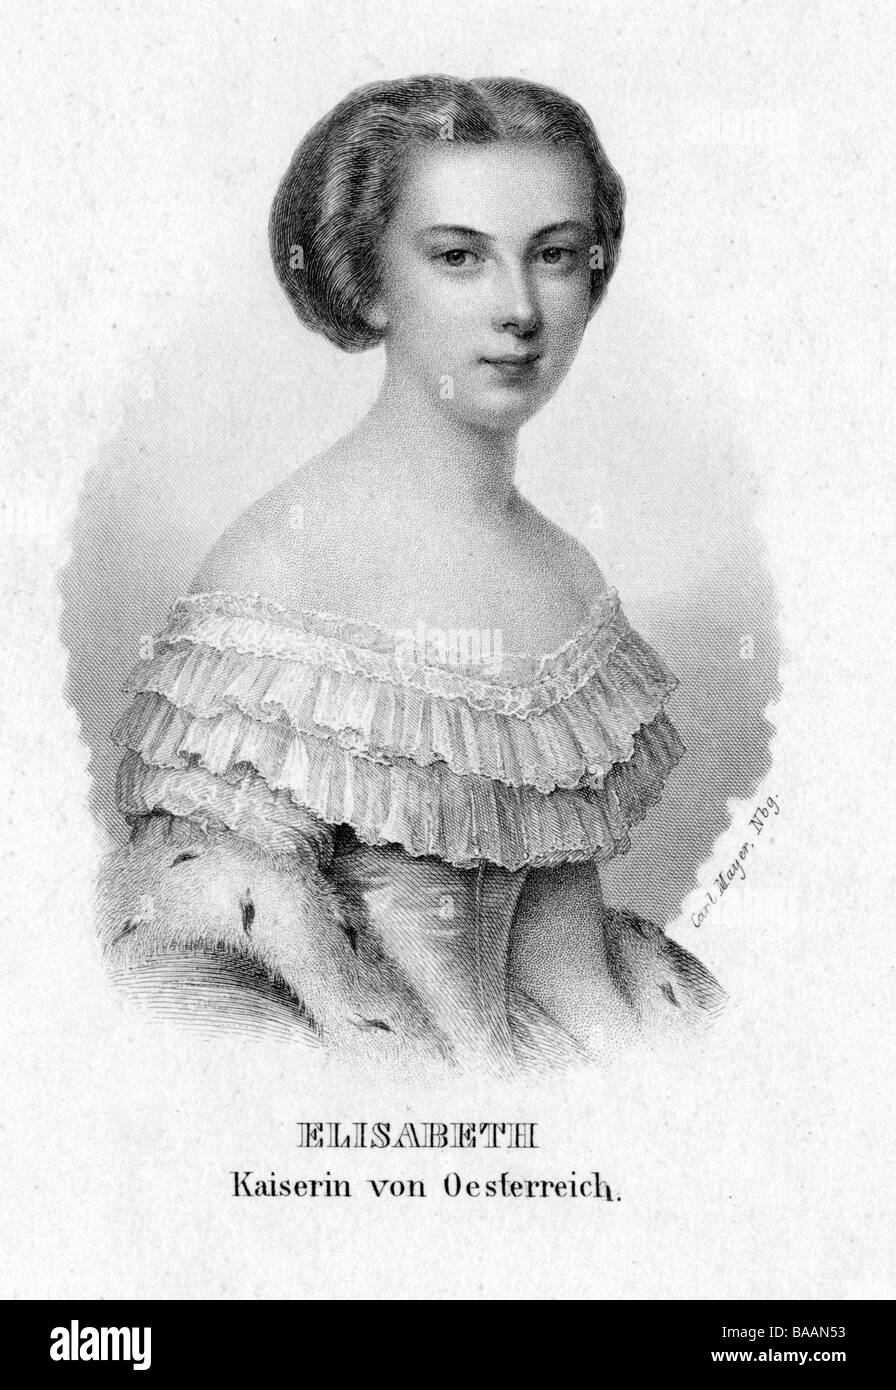 Elisabeth Amalie of Bavaria, 24.12.1837 - 10.9.1898, Empress consort of Austria since 24.4.1854, Queen consort of Hungary, called 'Sisi', portrait, steel engraving by Carl Mayer, 19th century, Artist's Copyright has not to be cleared Stock Photo